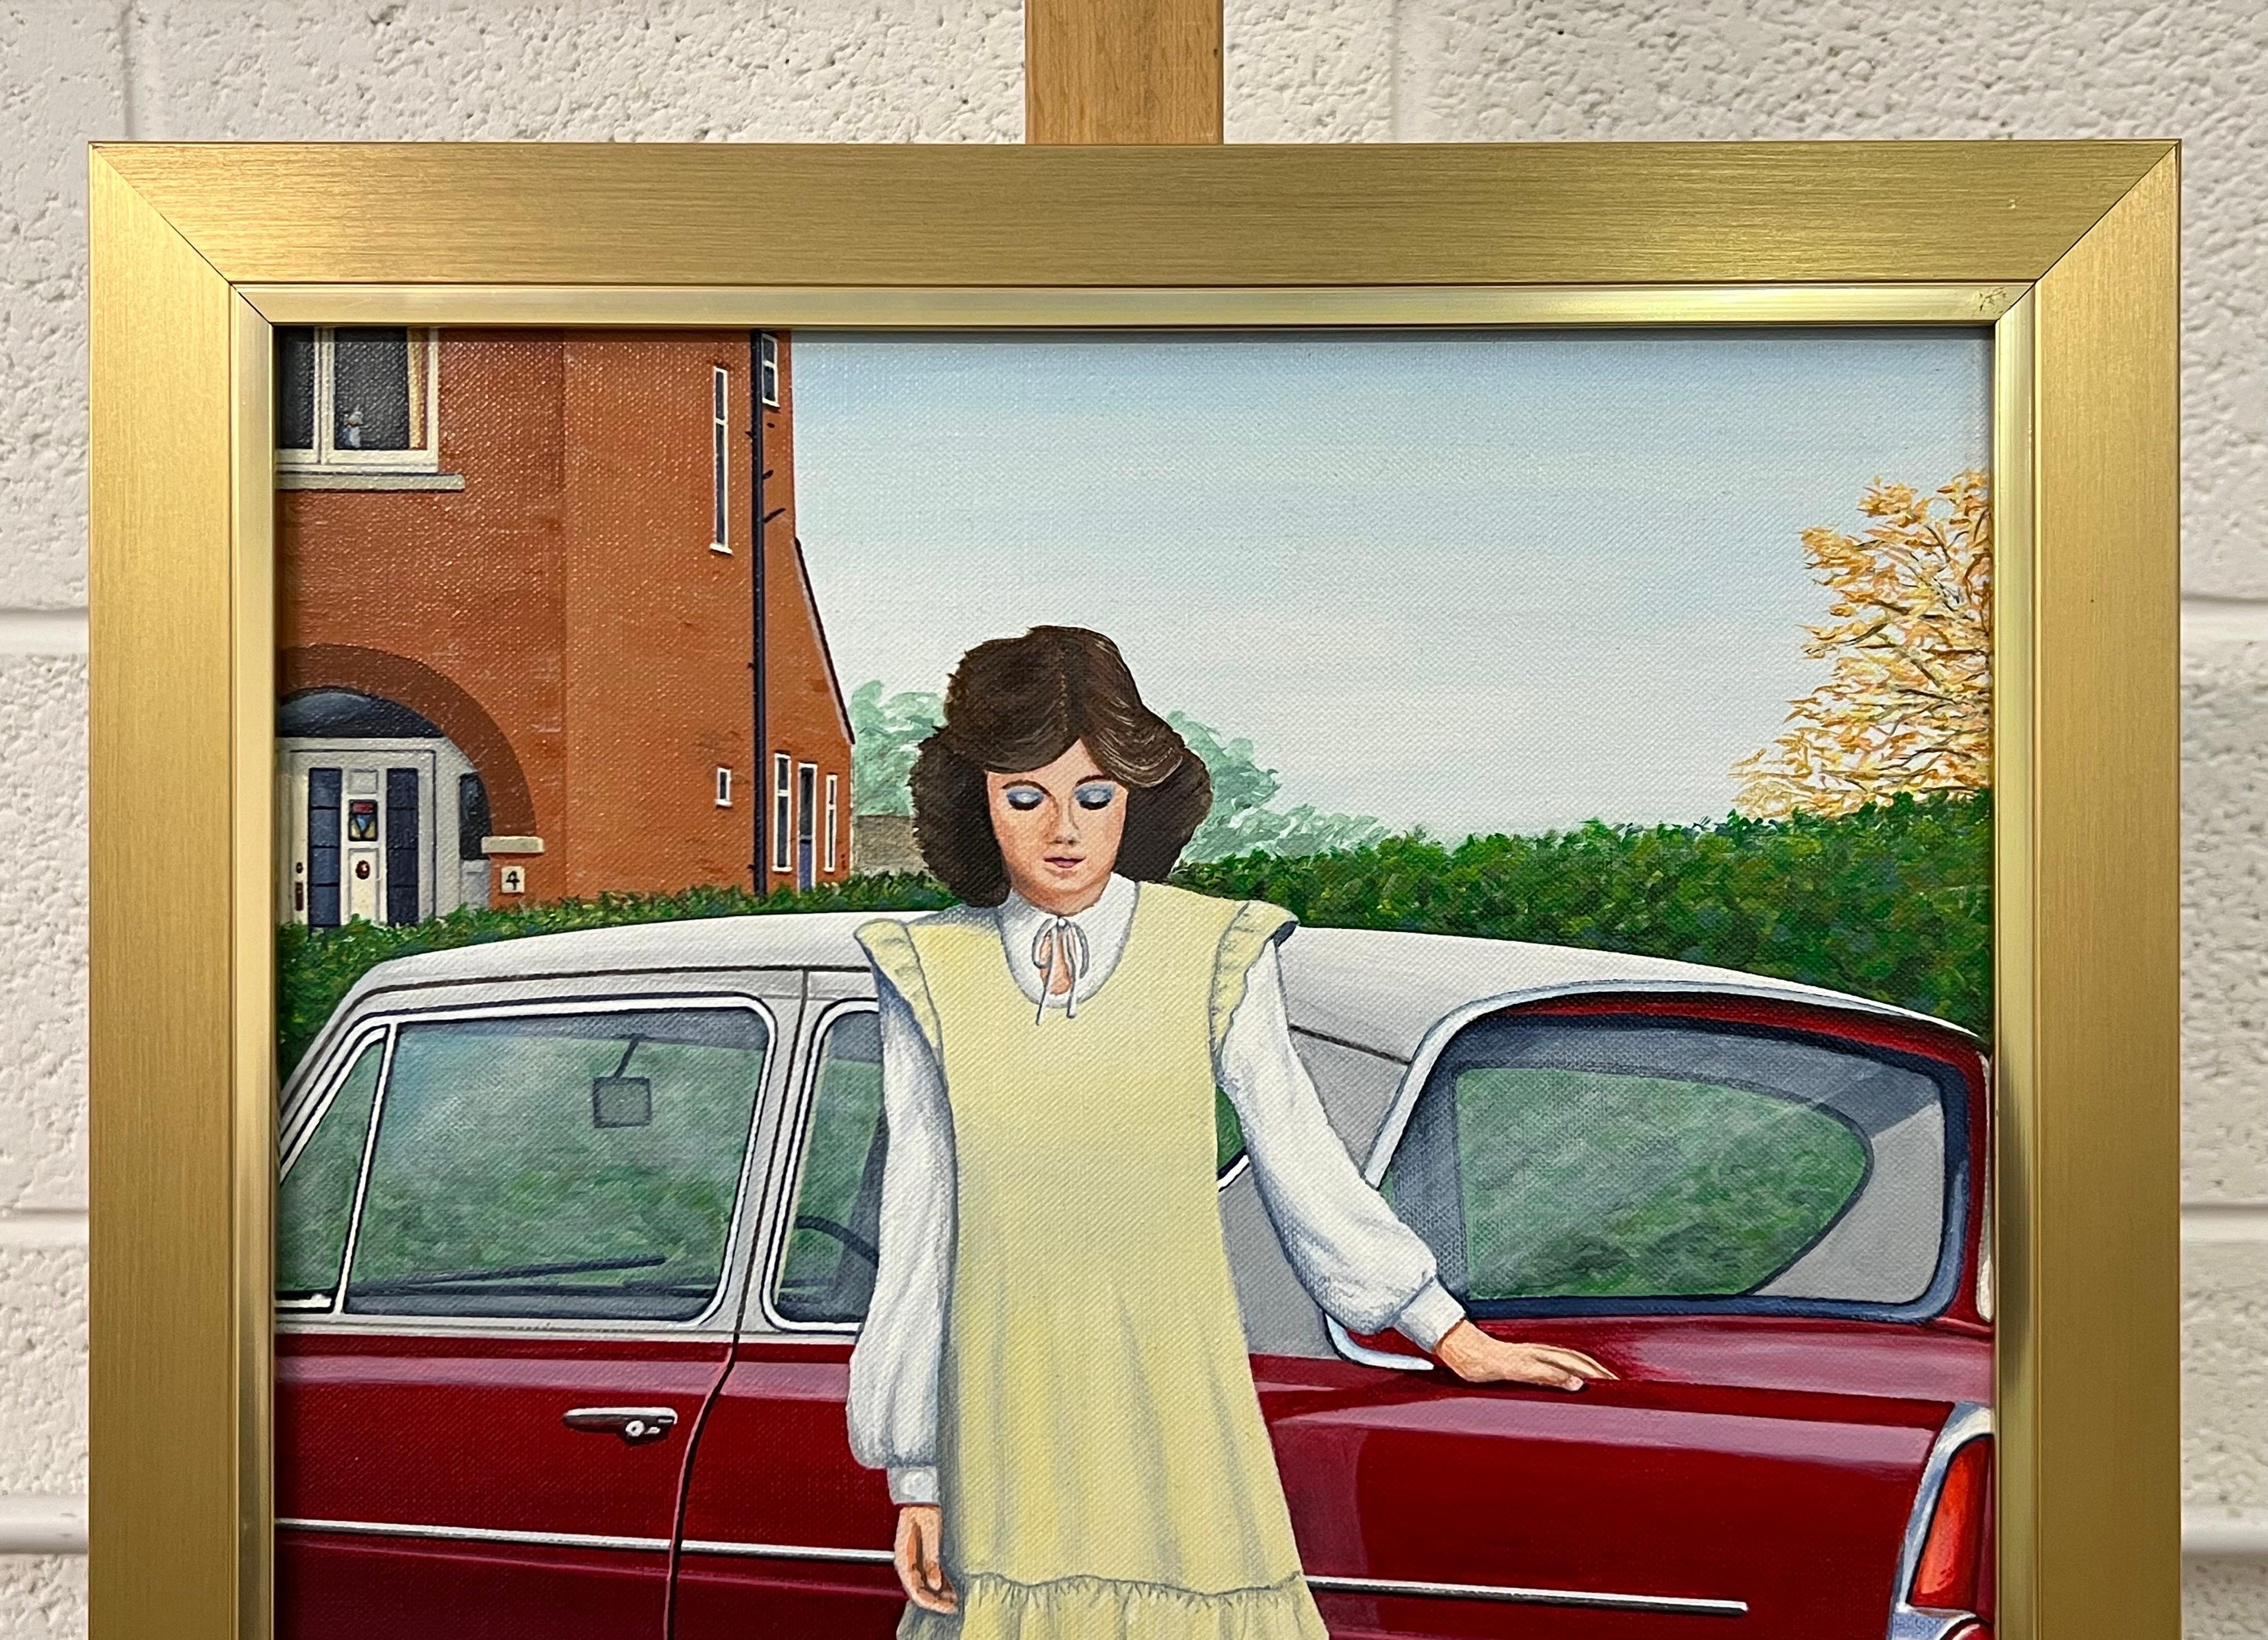 Vintage English Woman in Suburbia with Classic Ford Car 1960's 1970's England  For Sale 1